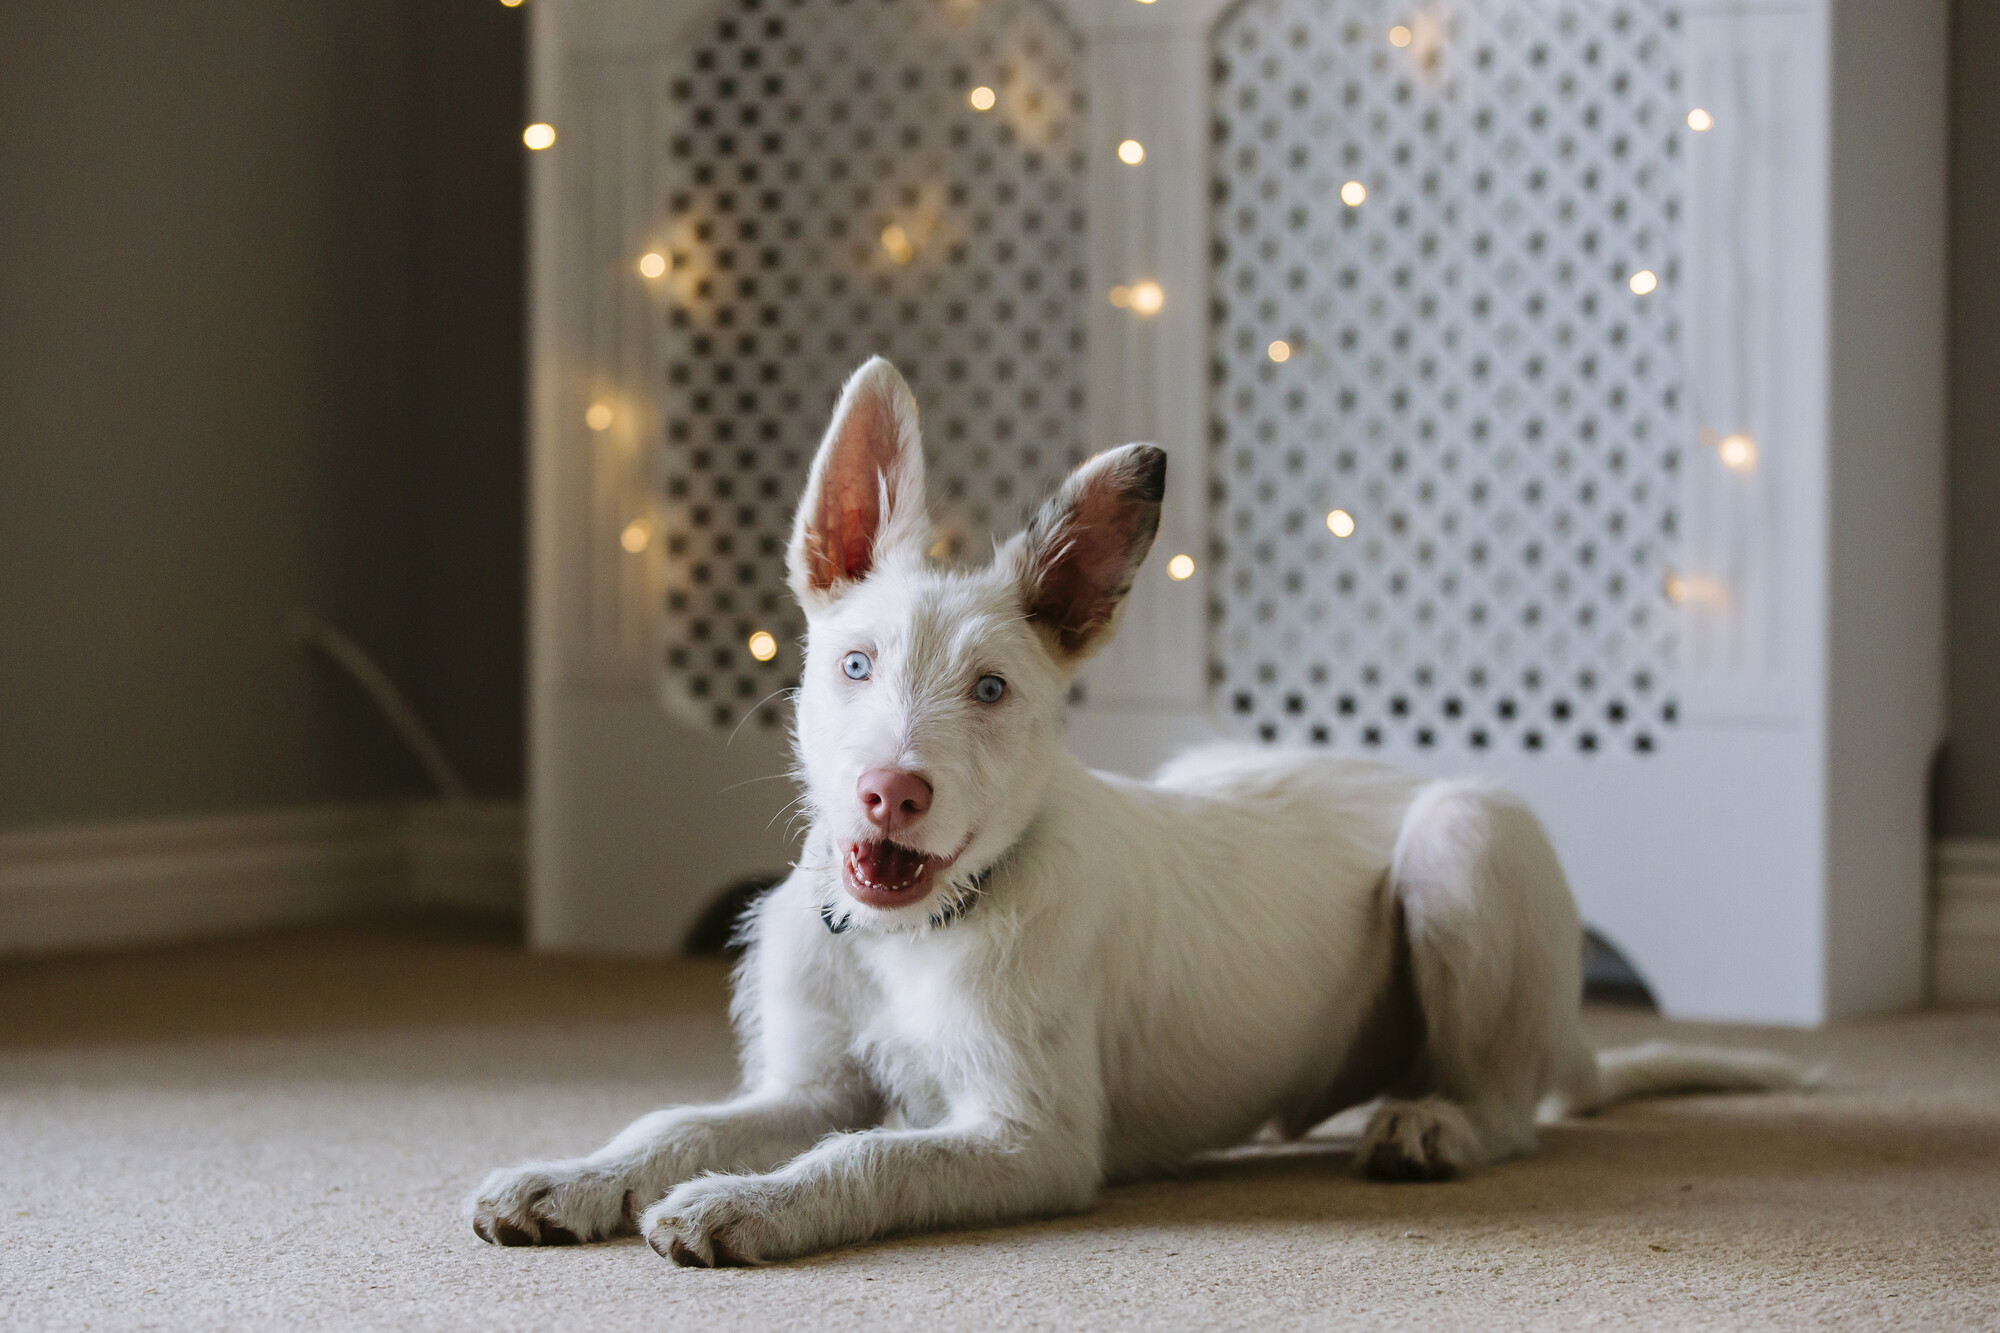 Pickle when he was a puppy laying down on carpet next to some fairy lights